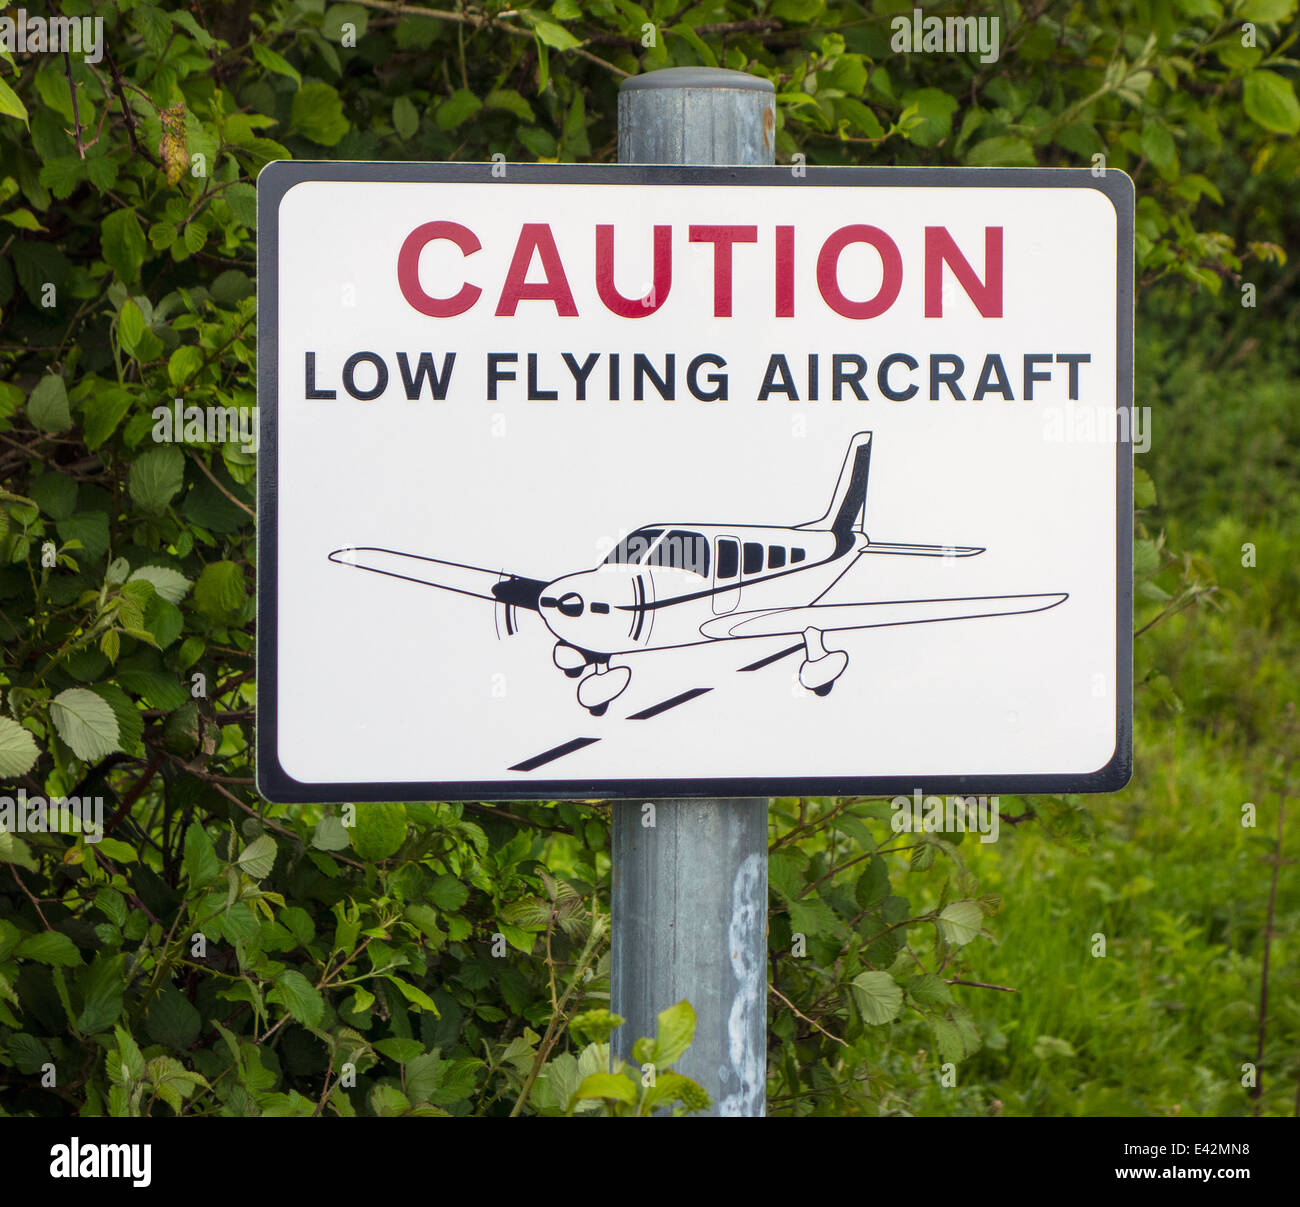 Low flying aircraft sign Stock Photo